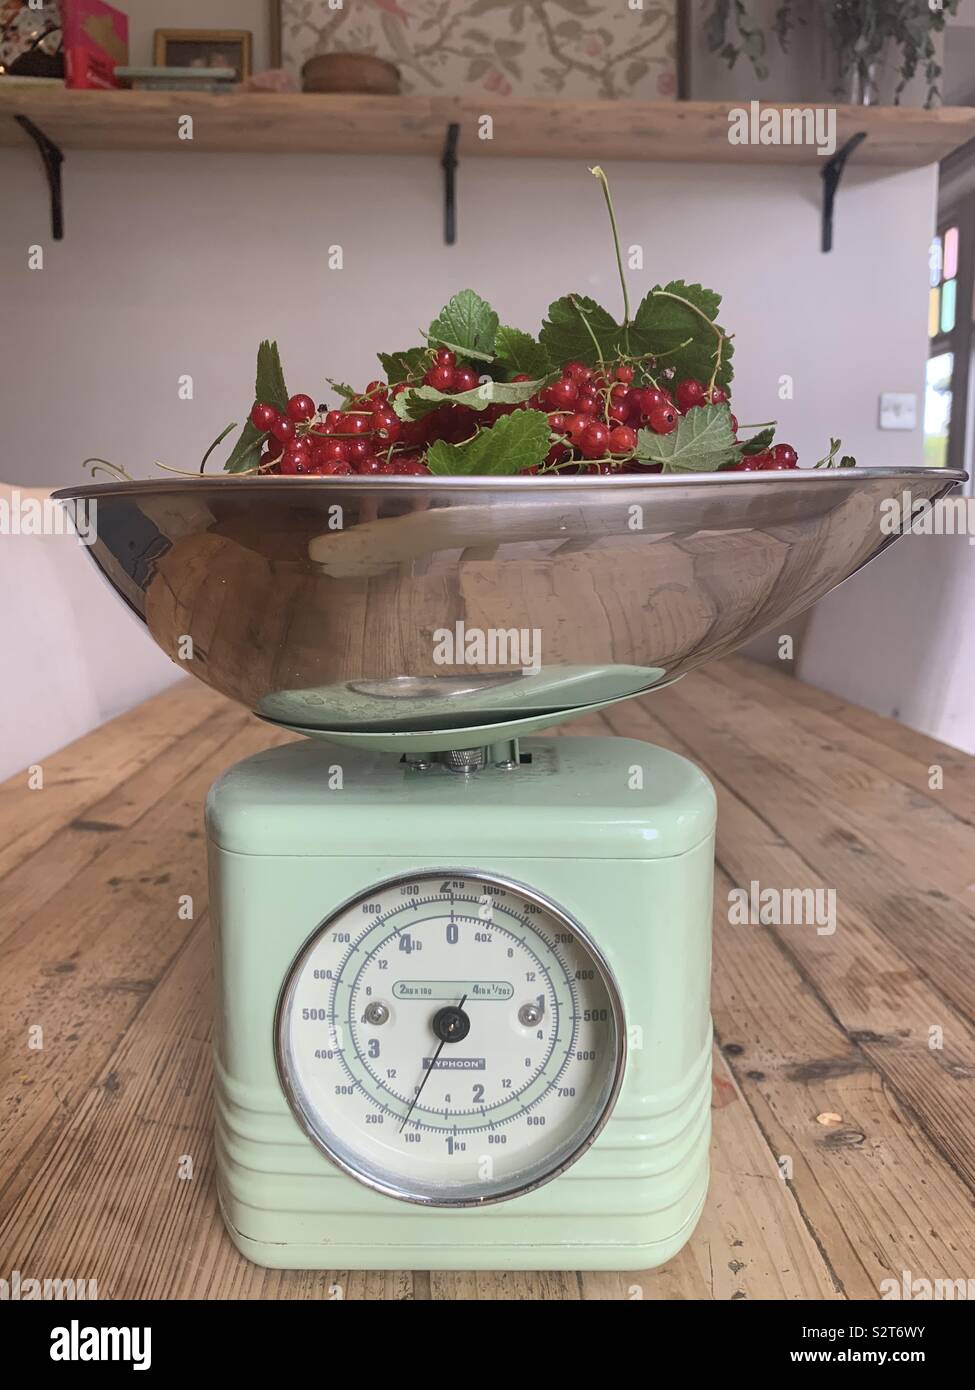 https://c8.alamy.com/comp/S2T6WY/vintage-retro-scales-with-homegrown-redcurrant-sin-it-S2T6WY.jpg